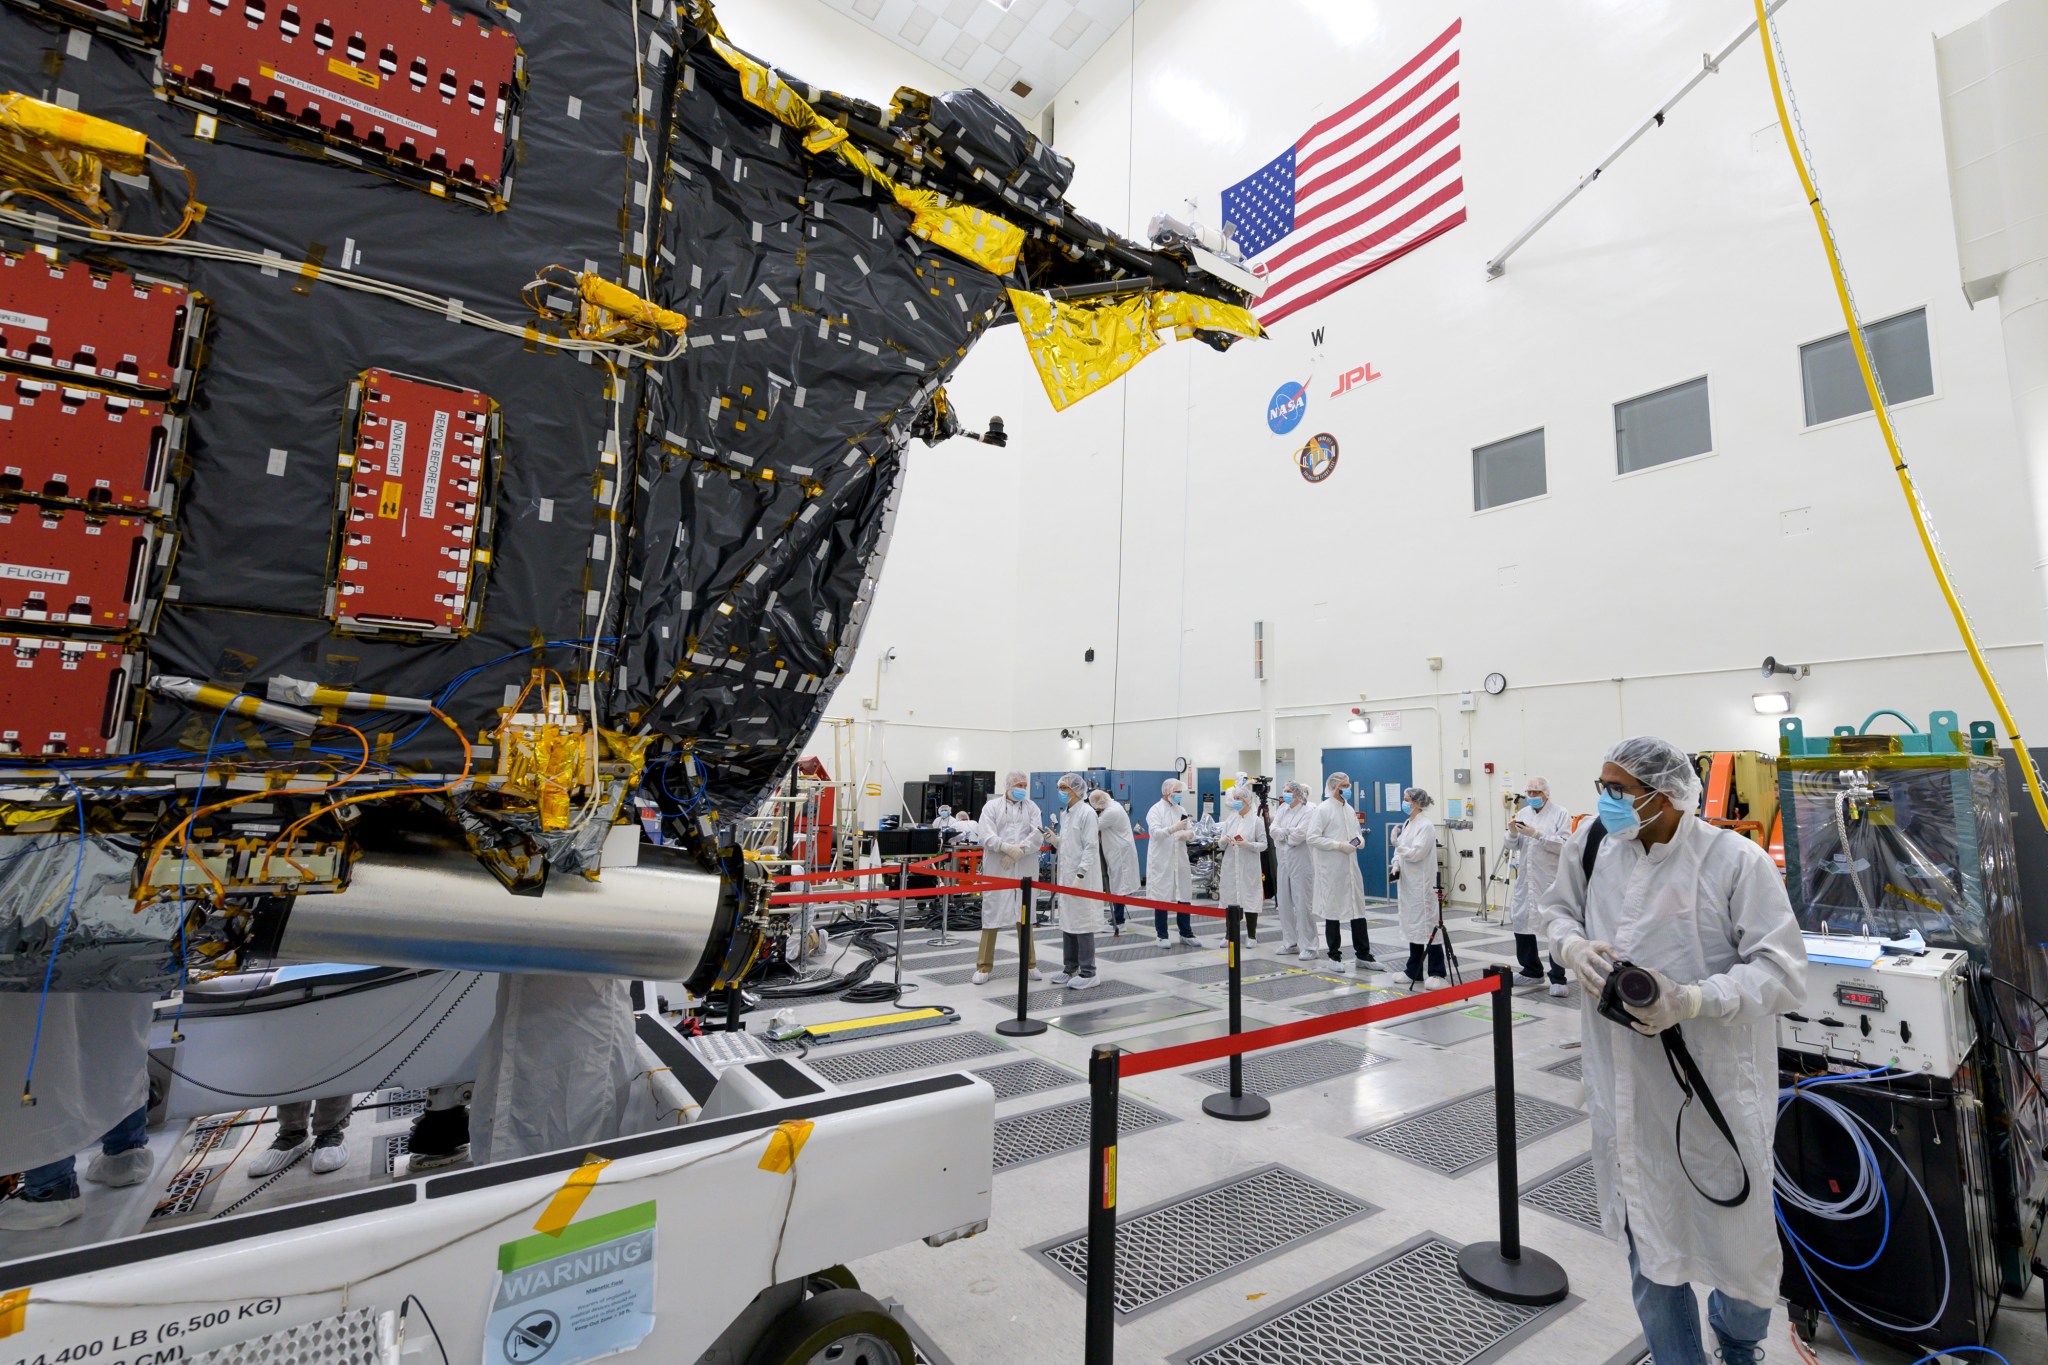 Members of the media view the Psyche spacecraft on April 11, 2022, inside a clean room at JPL.